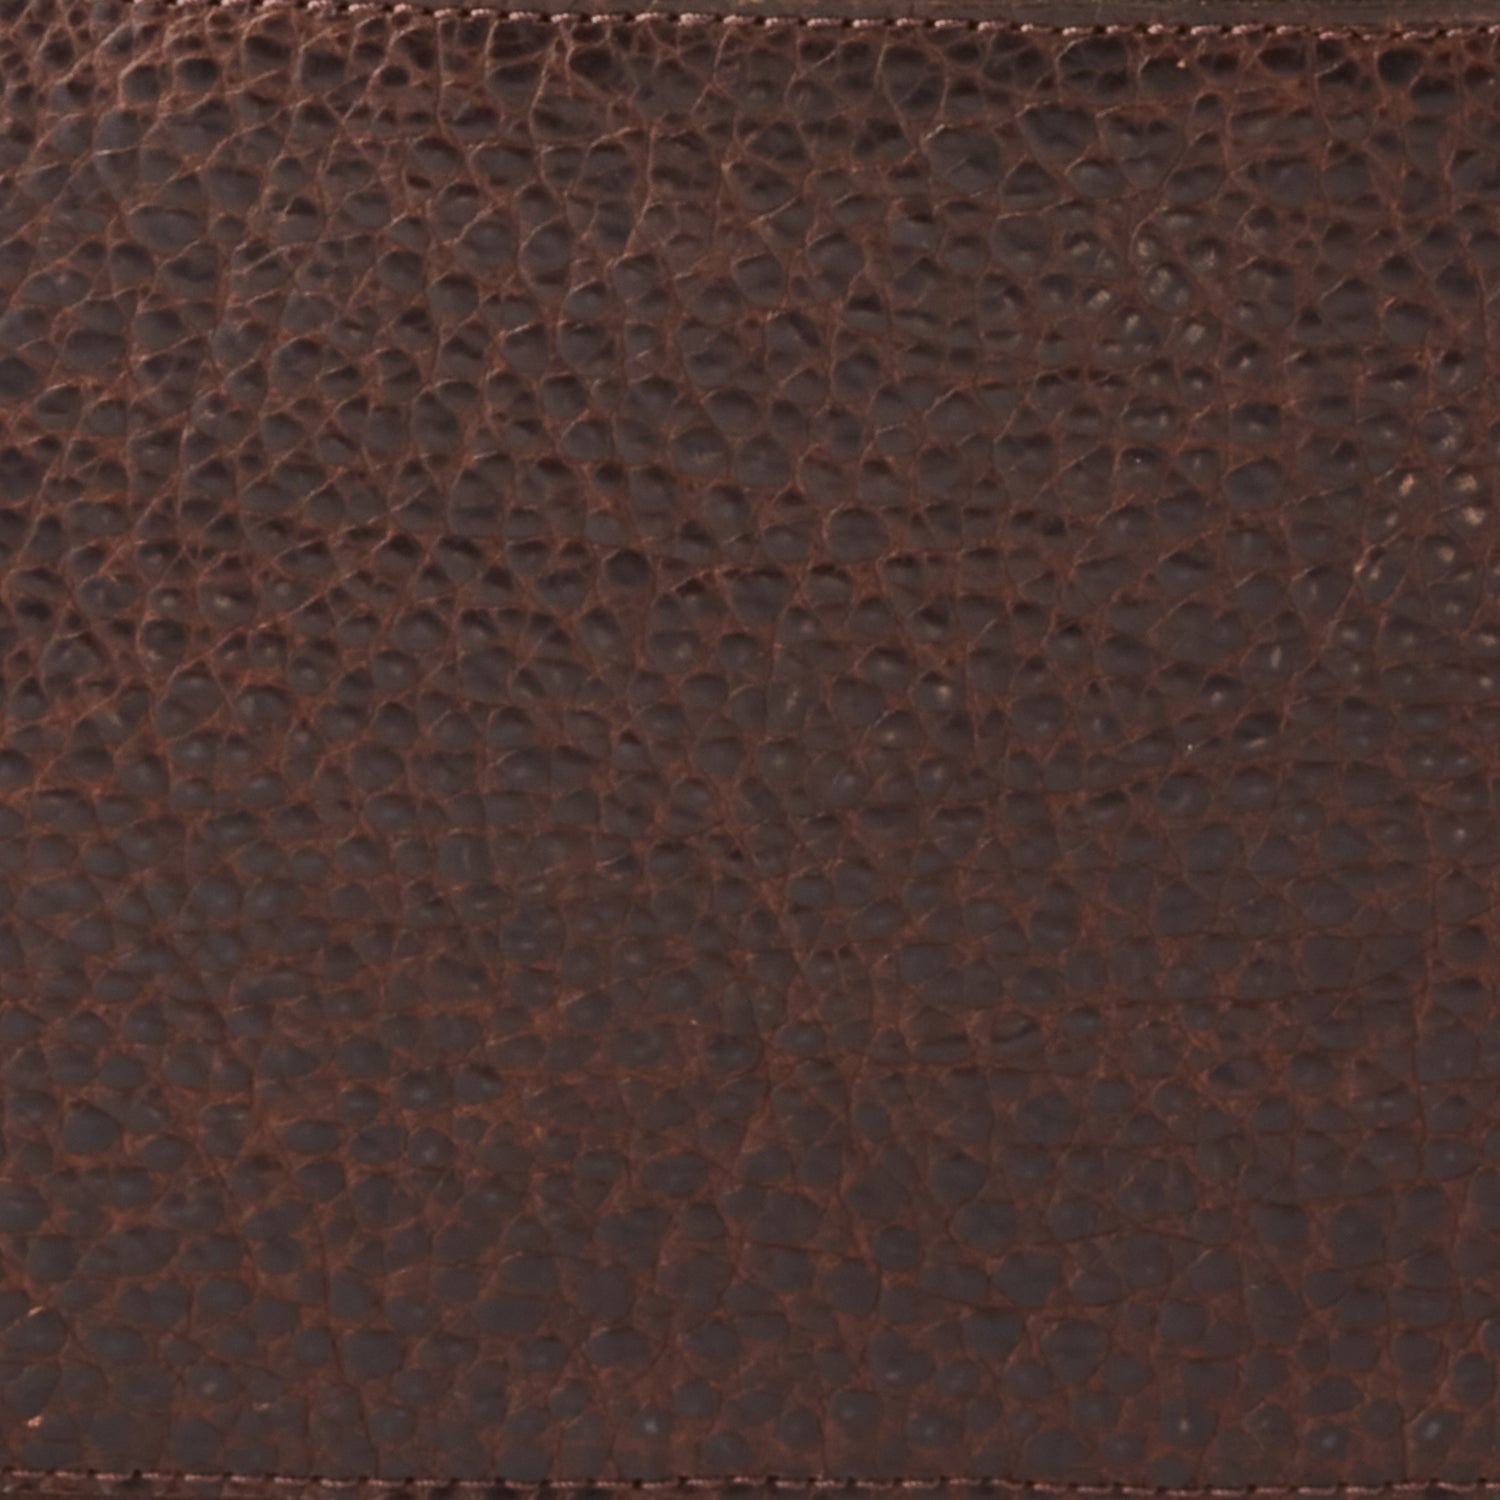 Authentic LV swatch on Metallic Cowhide